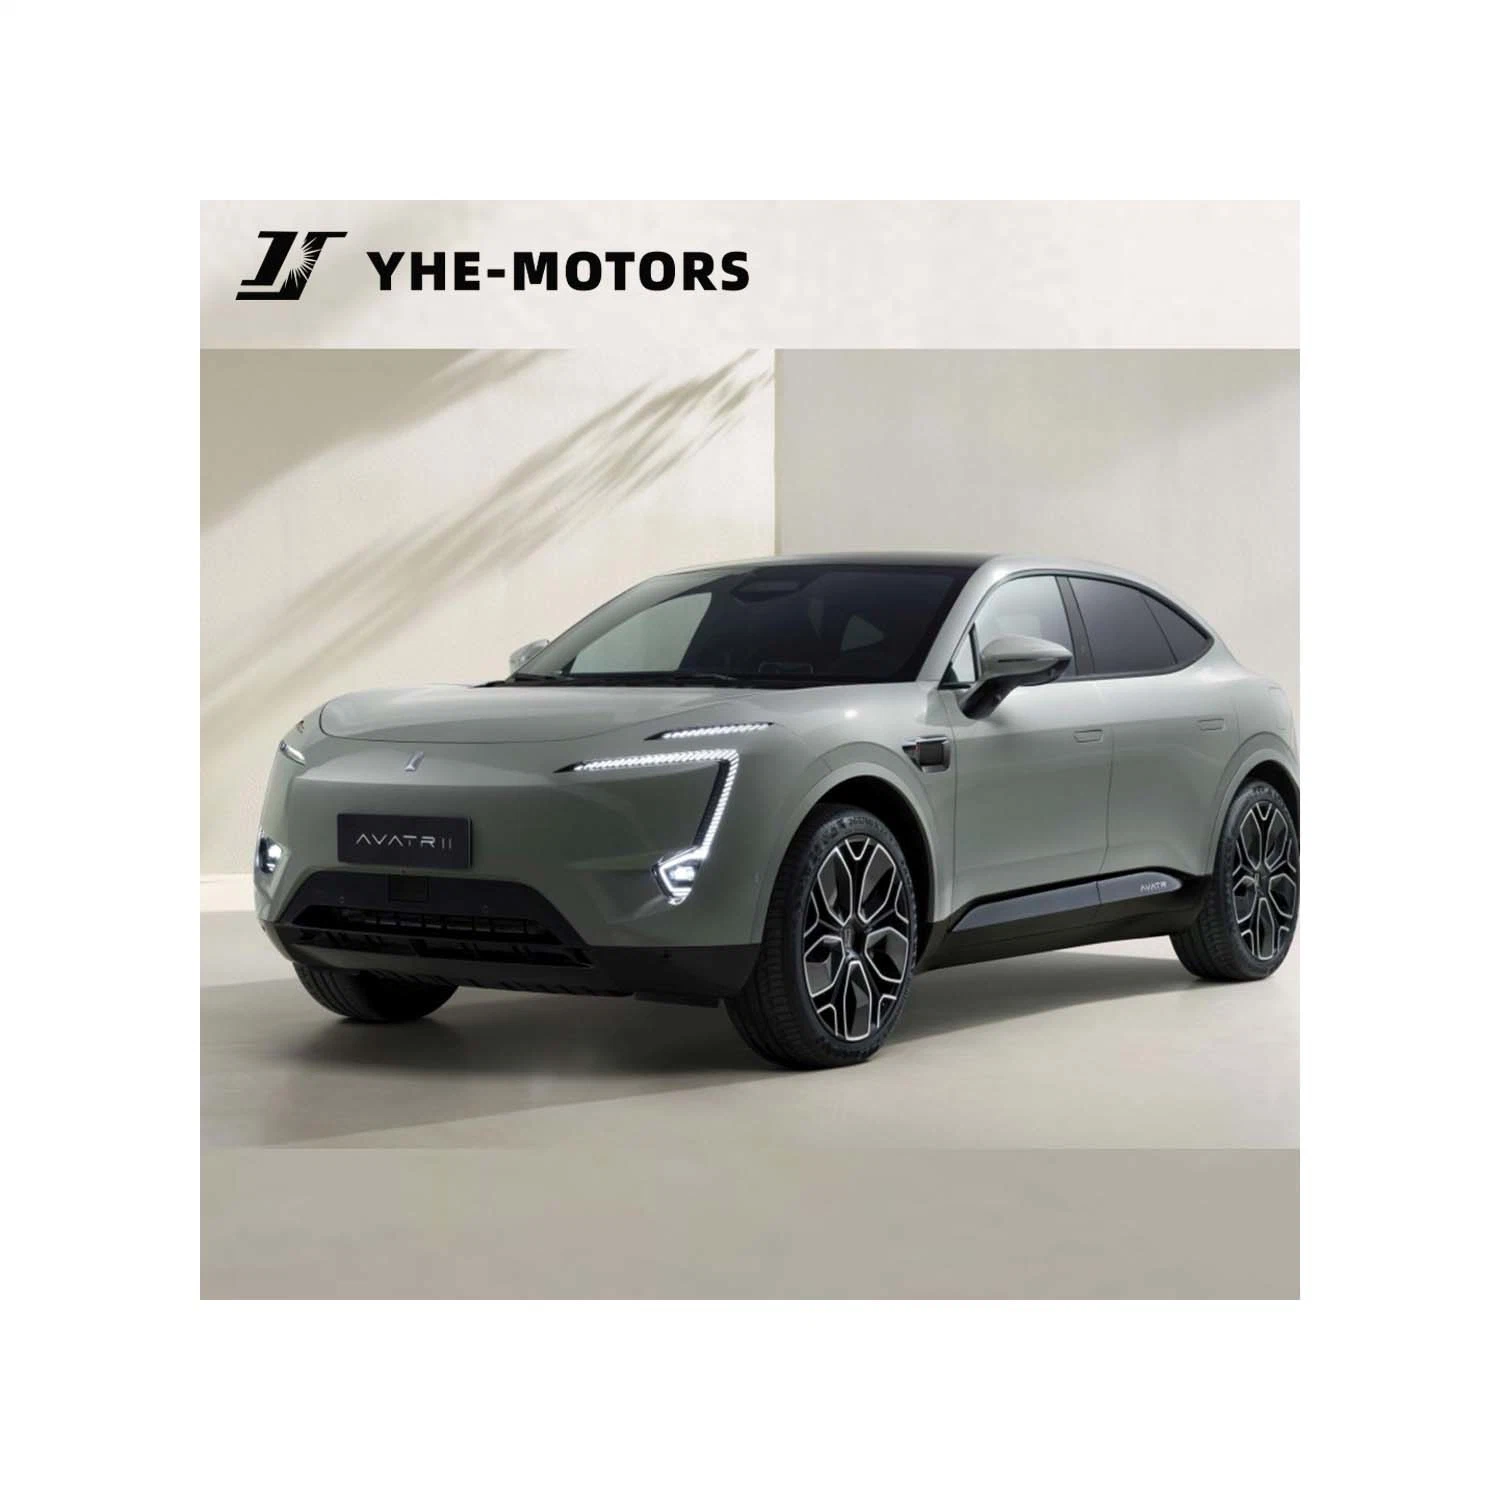 2023 New Energy Vehicles Luxury SUV Pure Electric Car Avatar 11 Changan Car High Speed Battery Car Long Range Electric Vehicle Motor Used Vehicle EV Car